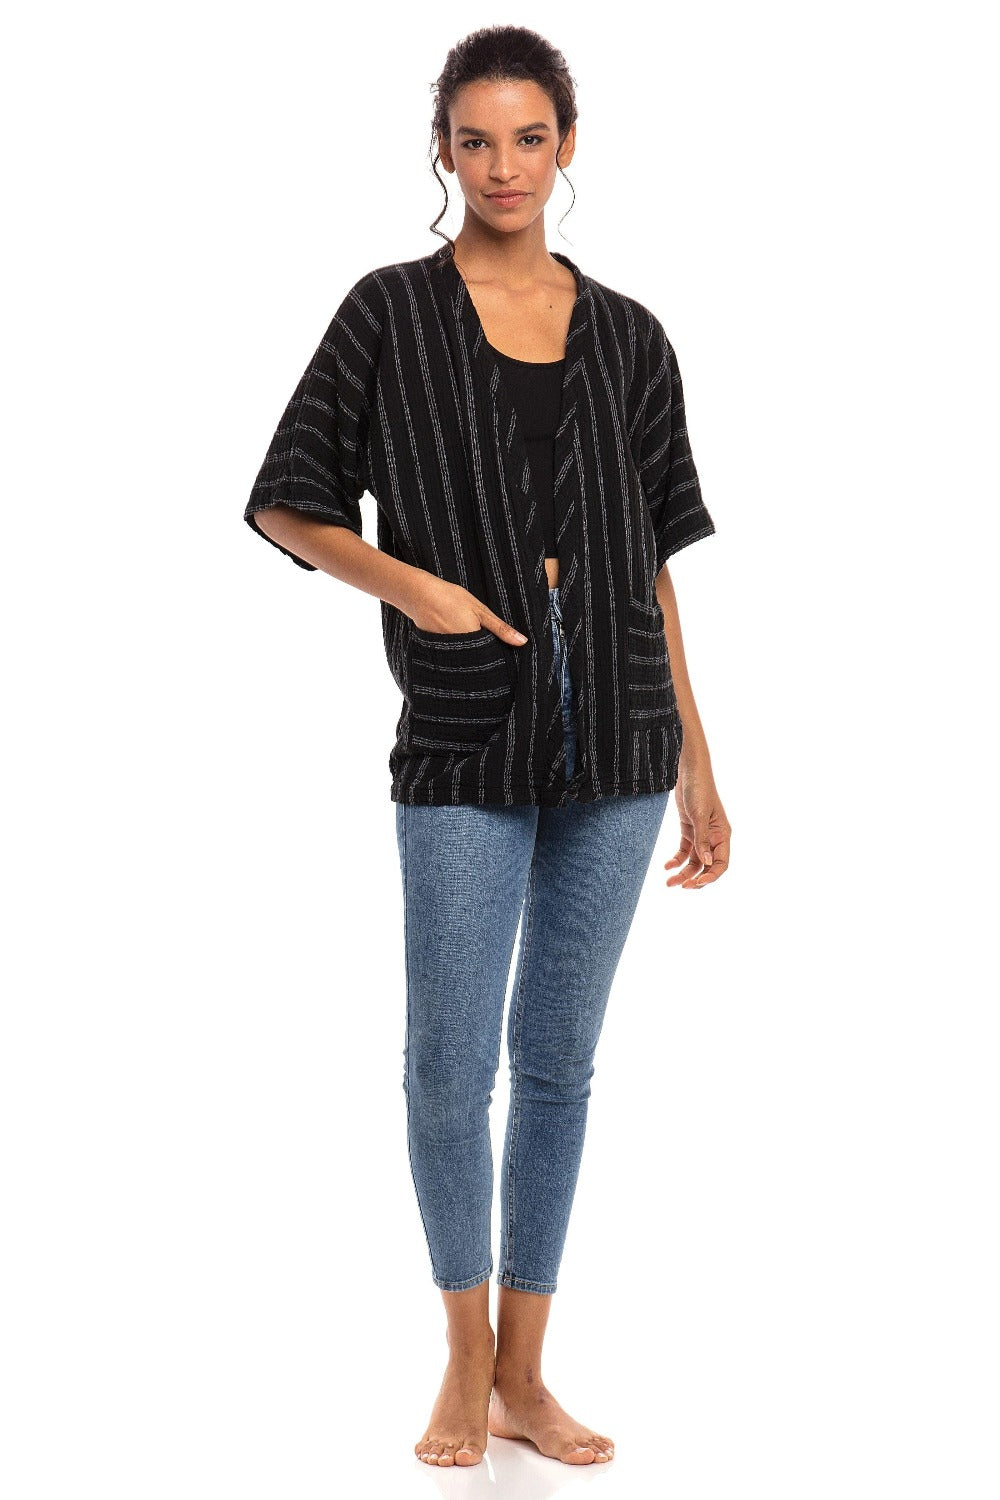 Short Sleeve Open Jacket in a double cotton with a stripe. The woman wearing this black jacket is using one of the two pockets.